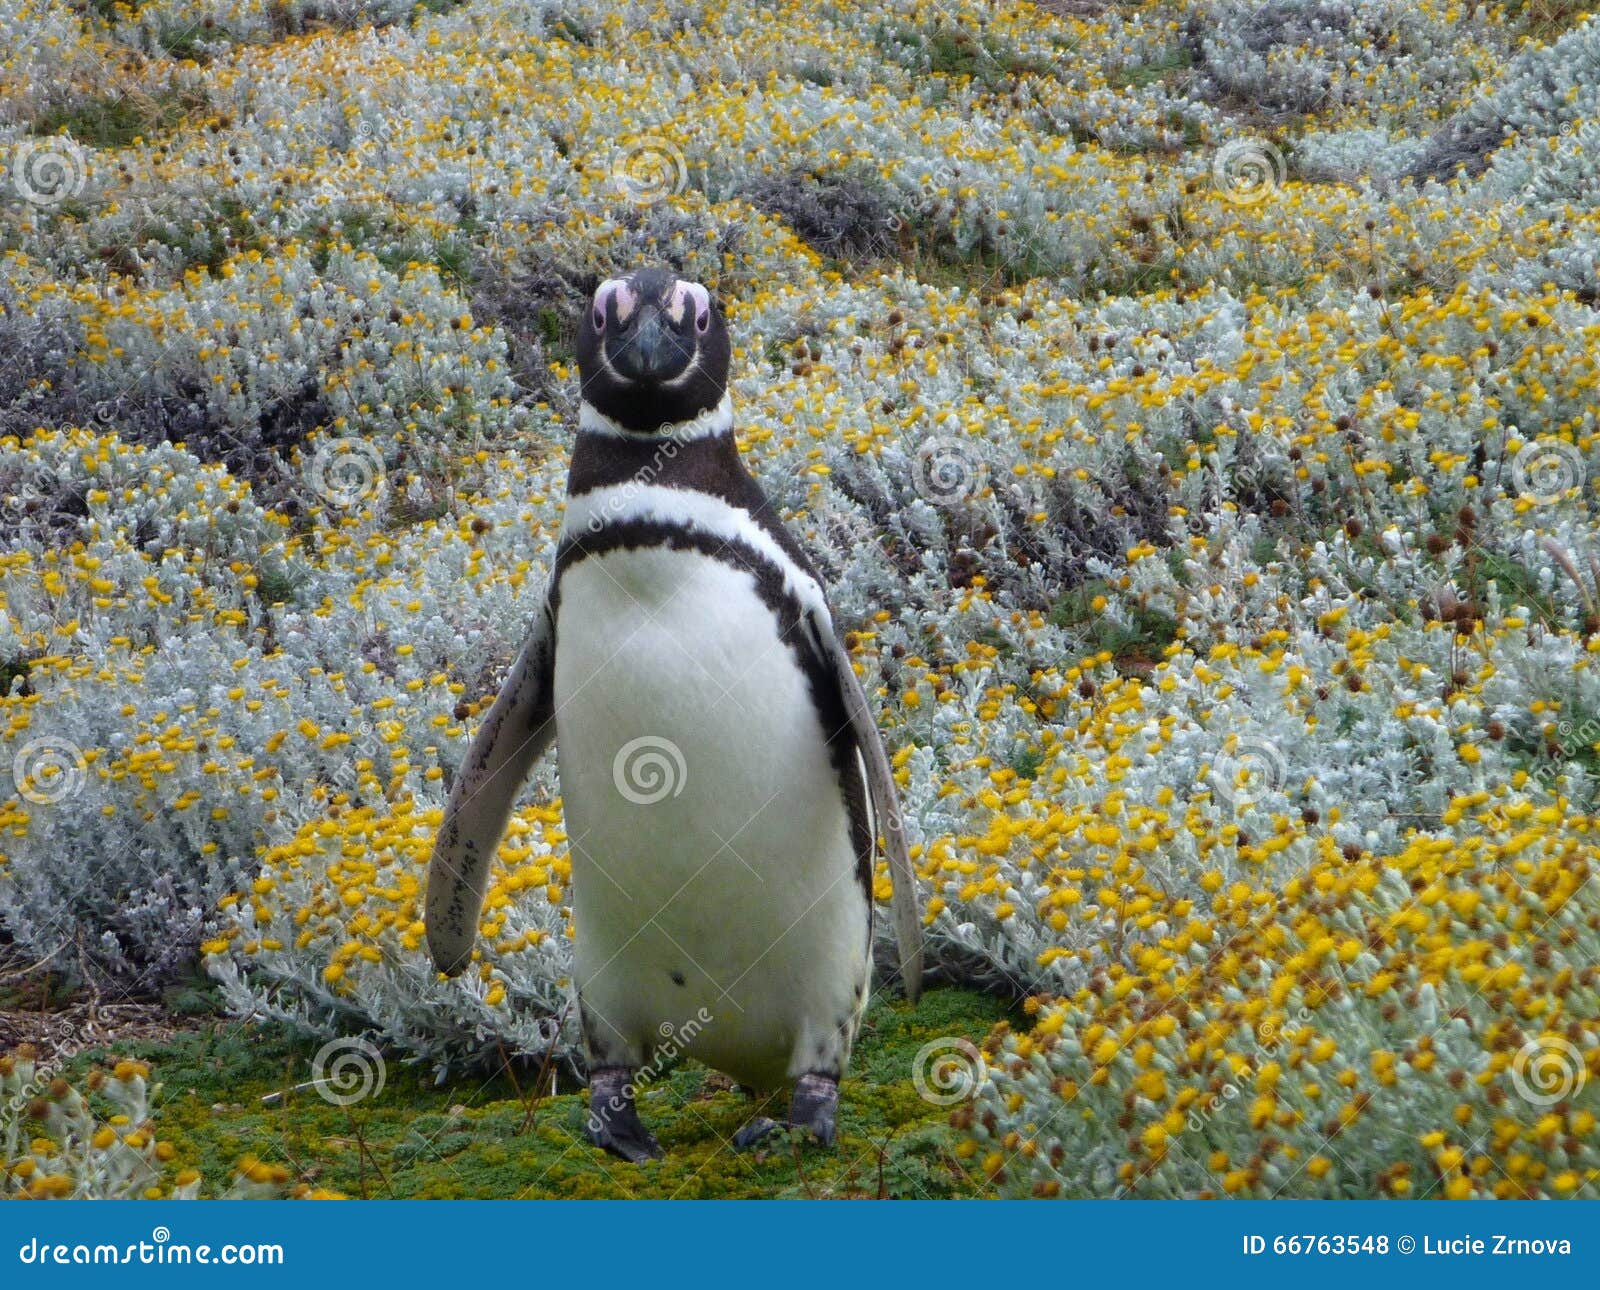 pinguin in a green and yellow moss in seno otway reservation in chile